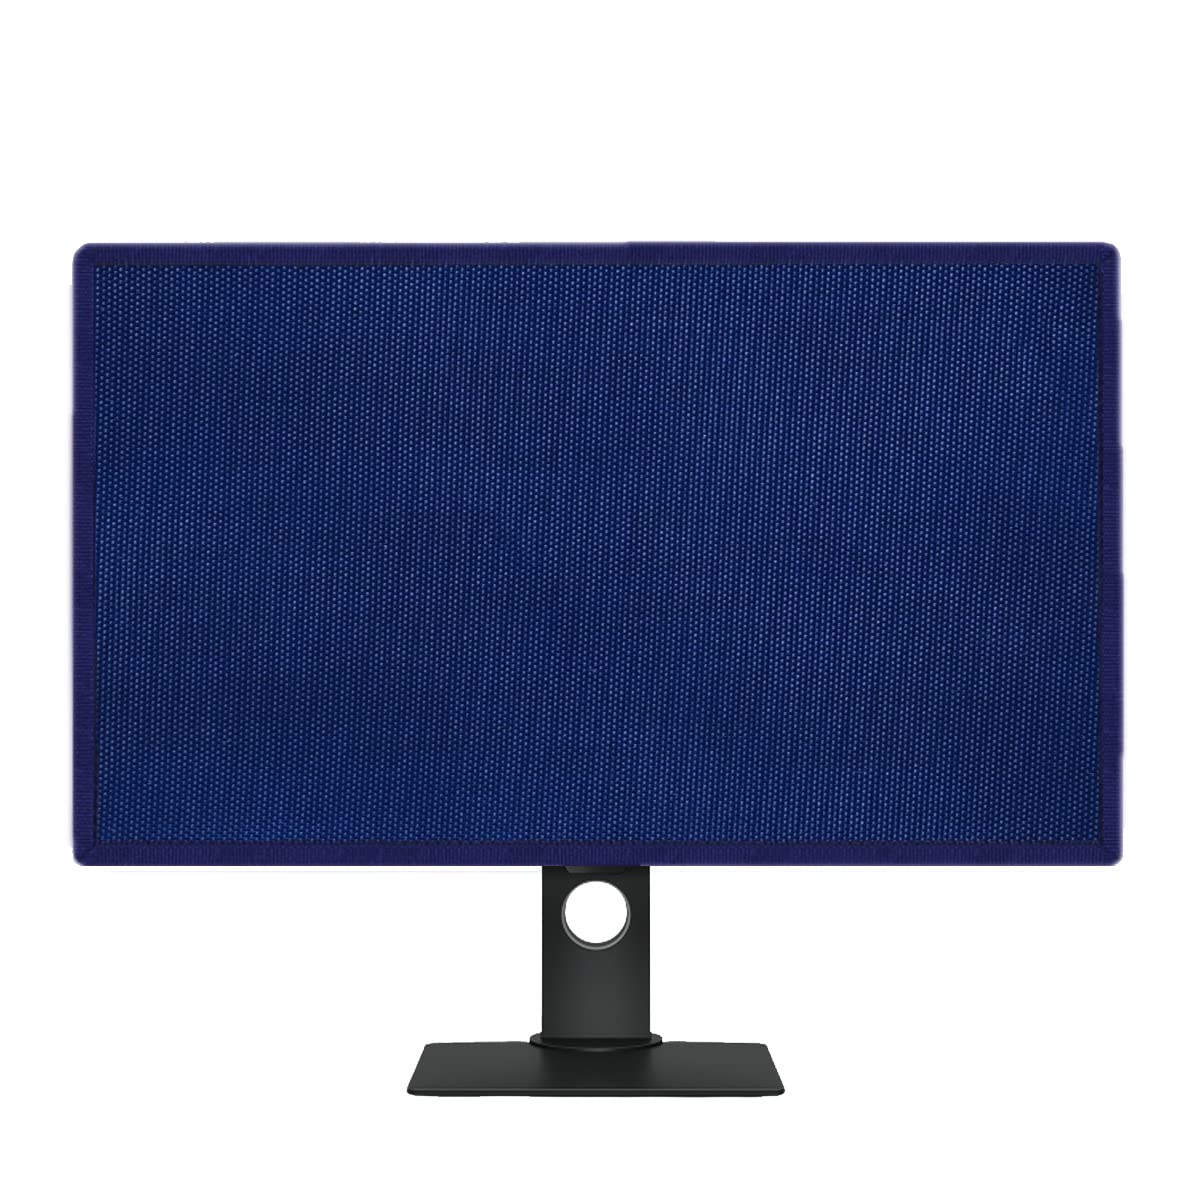 PalaP Dust Proof Monitor Cover for ASUS 27 inches Monitor